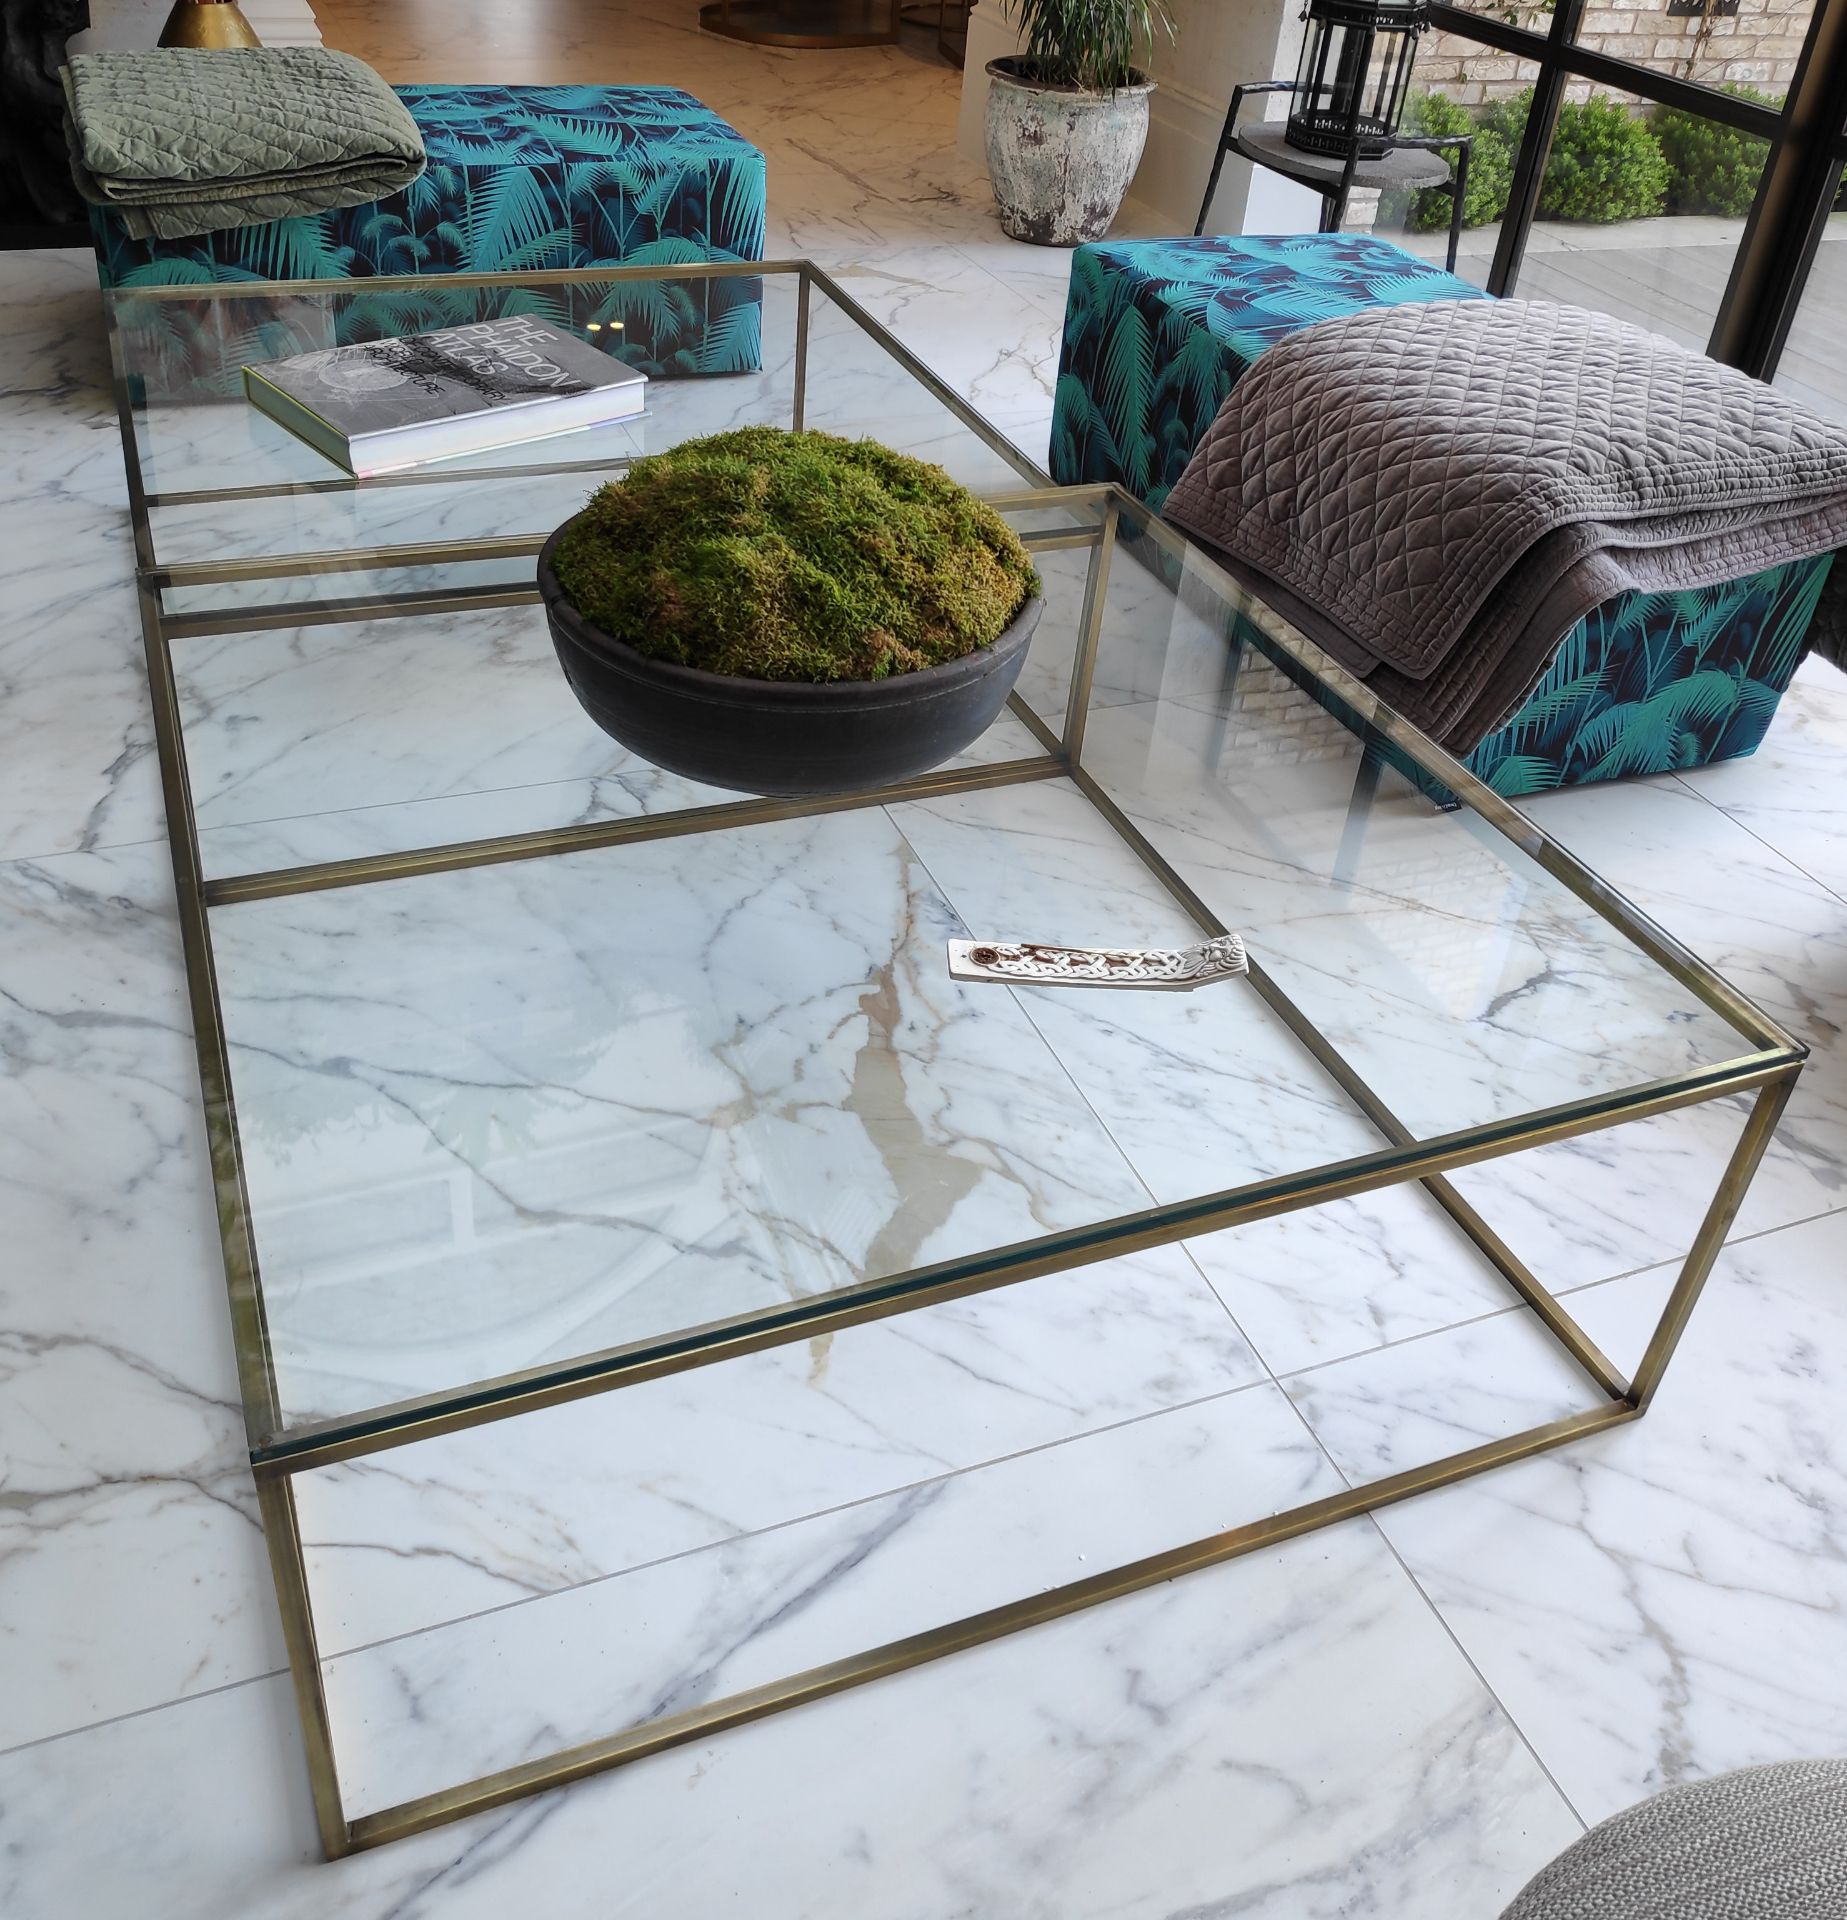 1 x Large 2-Tier Glass Coffee Table with Metal Frame - Dimensions: W240 x D120 x H45.5 cm - - Image 9 of 14